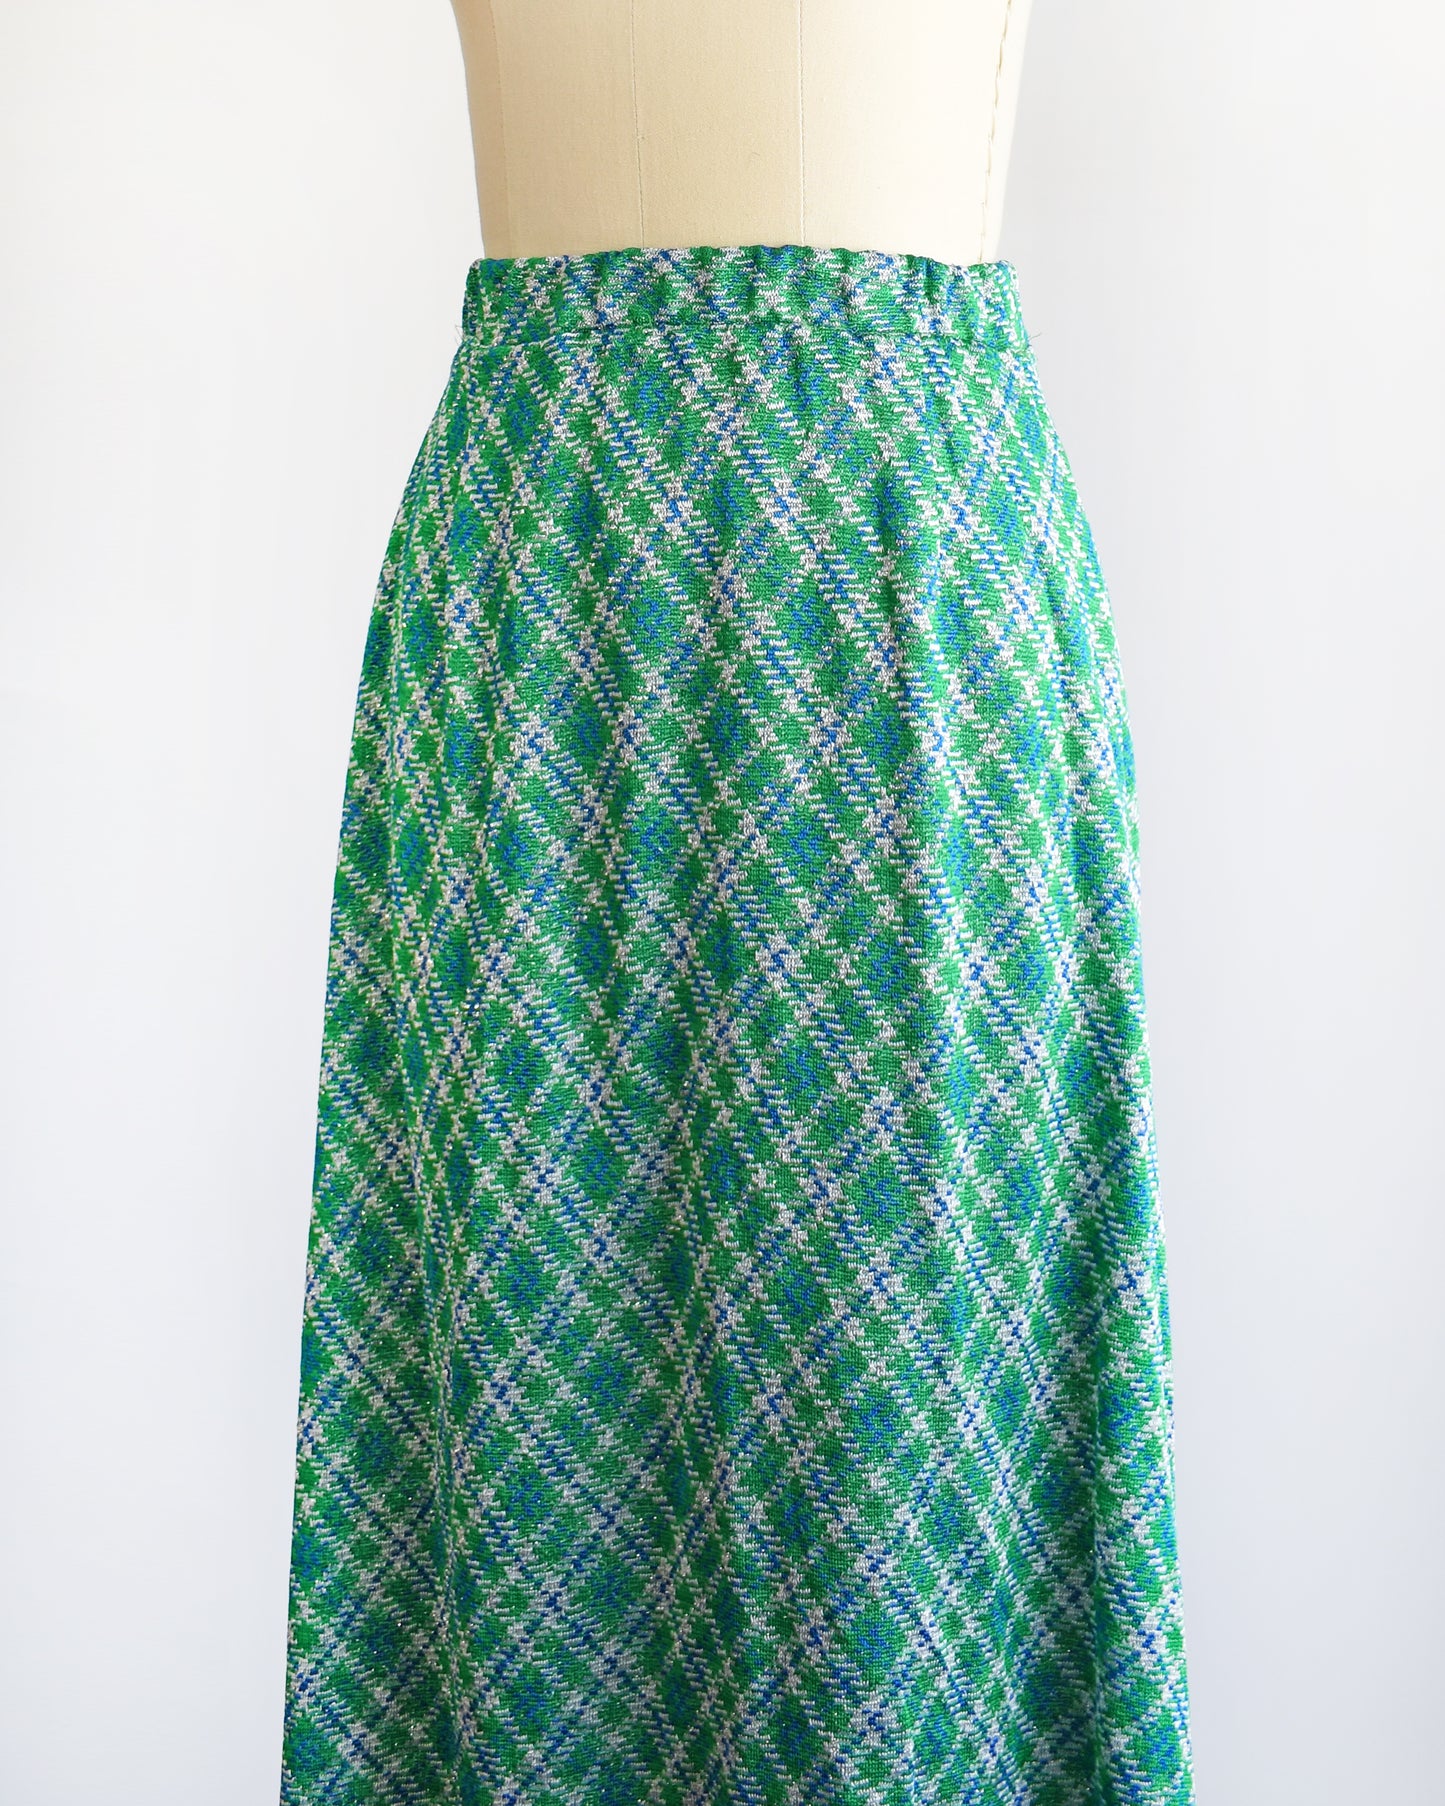 Side front view of a vintage 1970s maxi skirt that features festive green, blue, and white plaid fabric with silver metallic threads. 